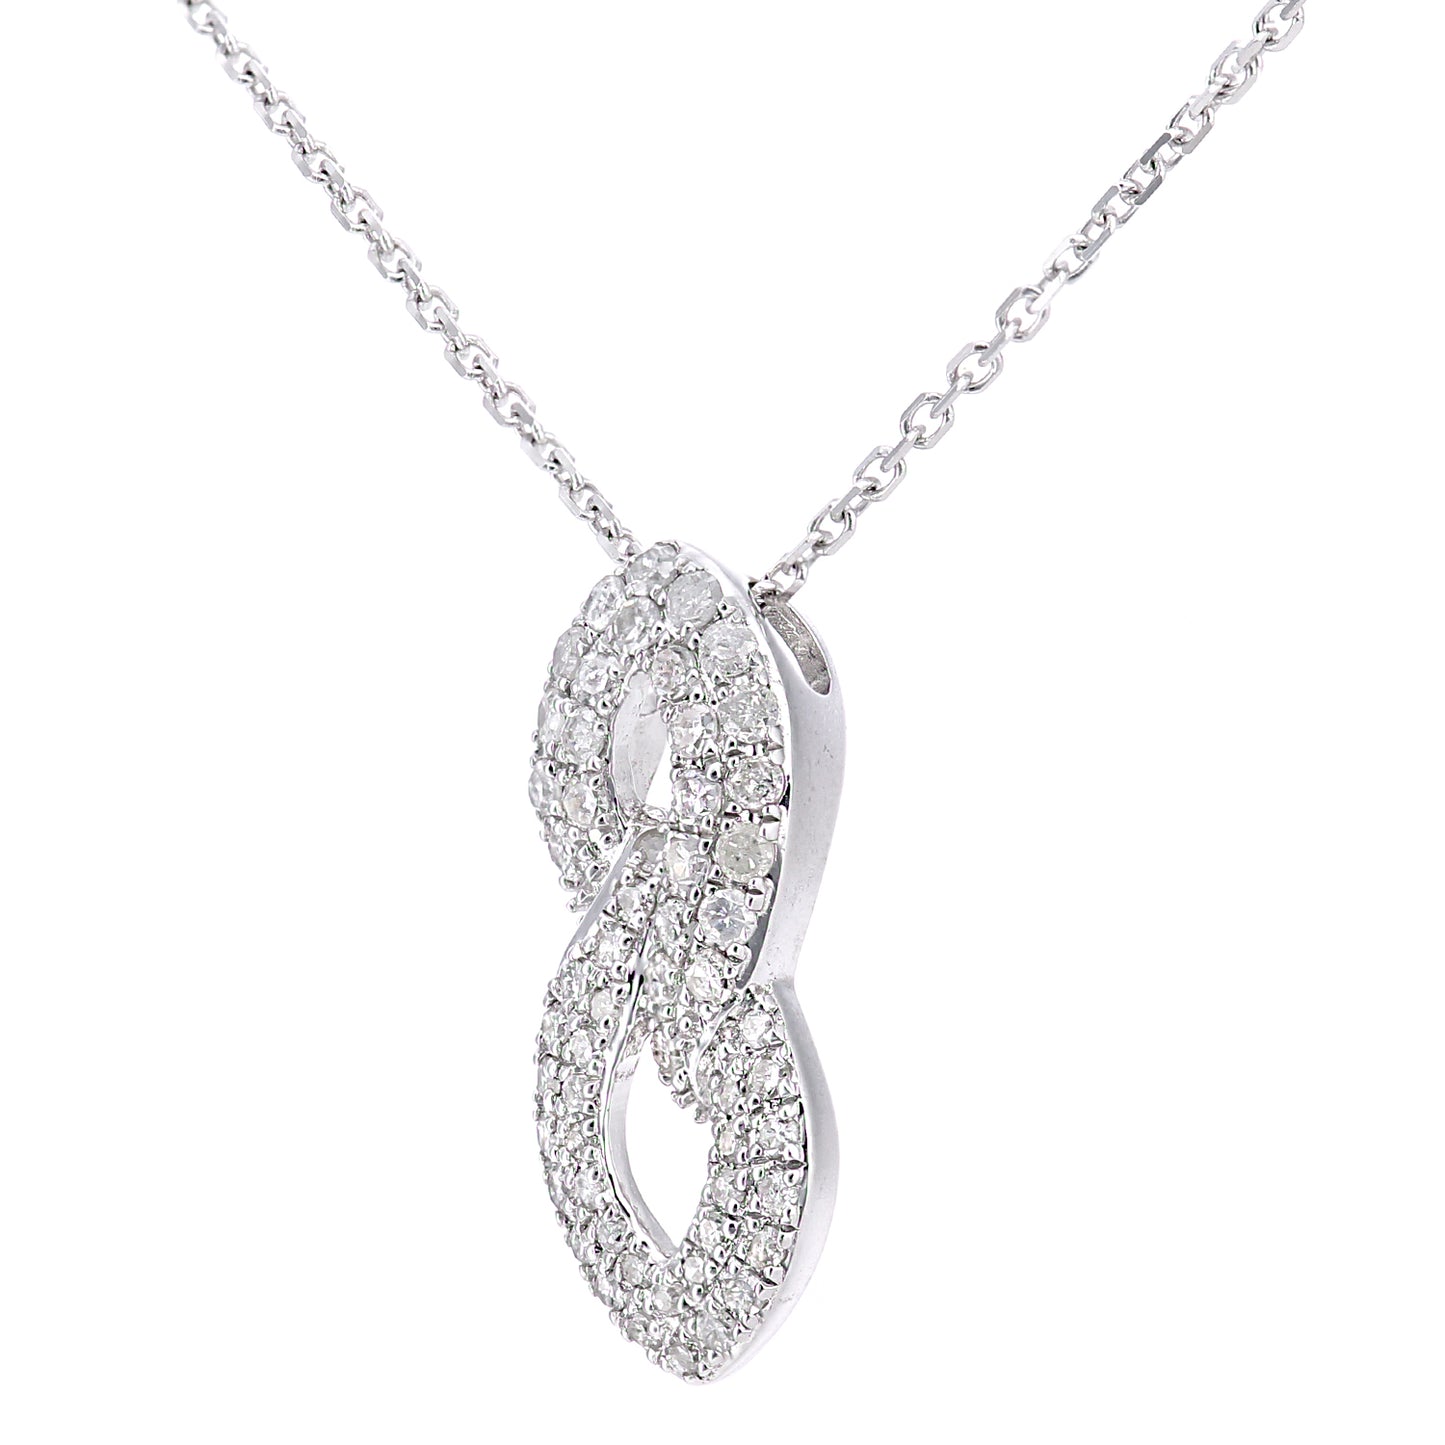 9ct White Gold  22pts Diamond Infinity Pendant Necklace 16 inch - DP1AXL638W